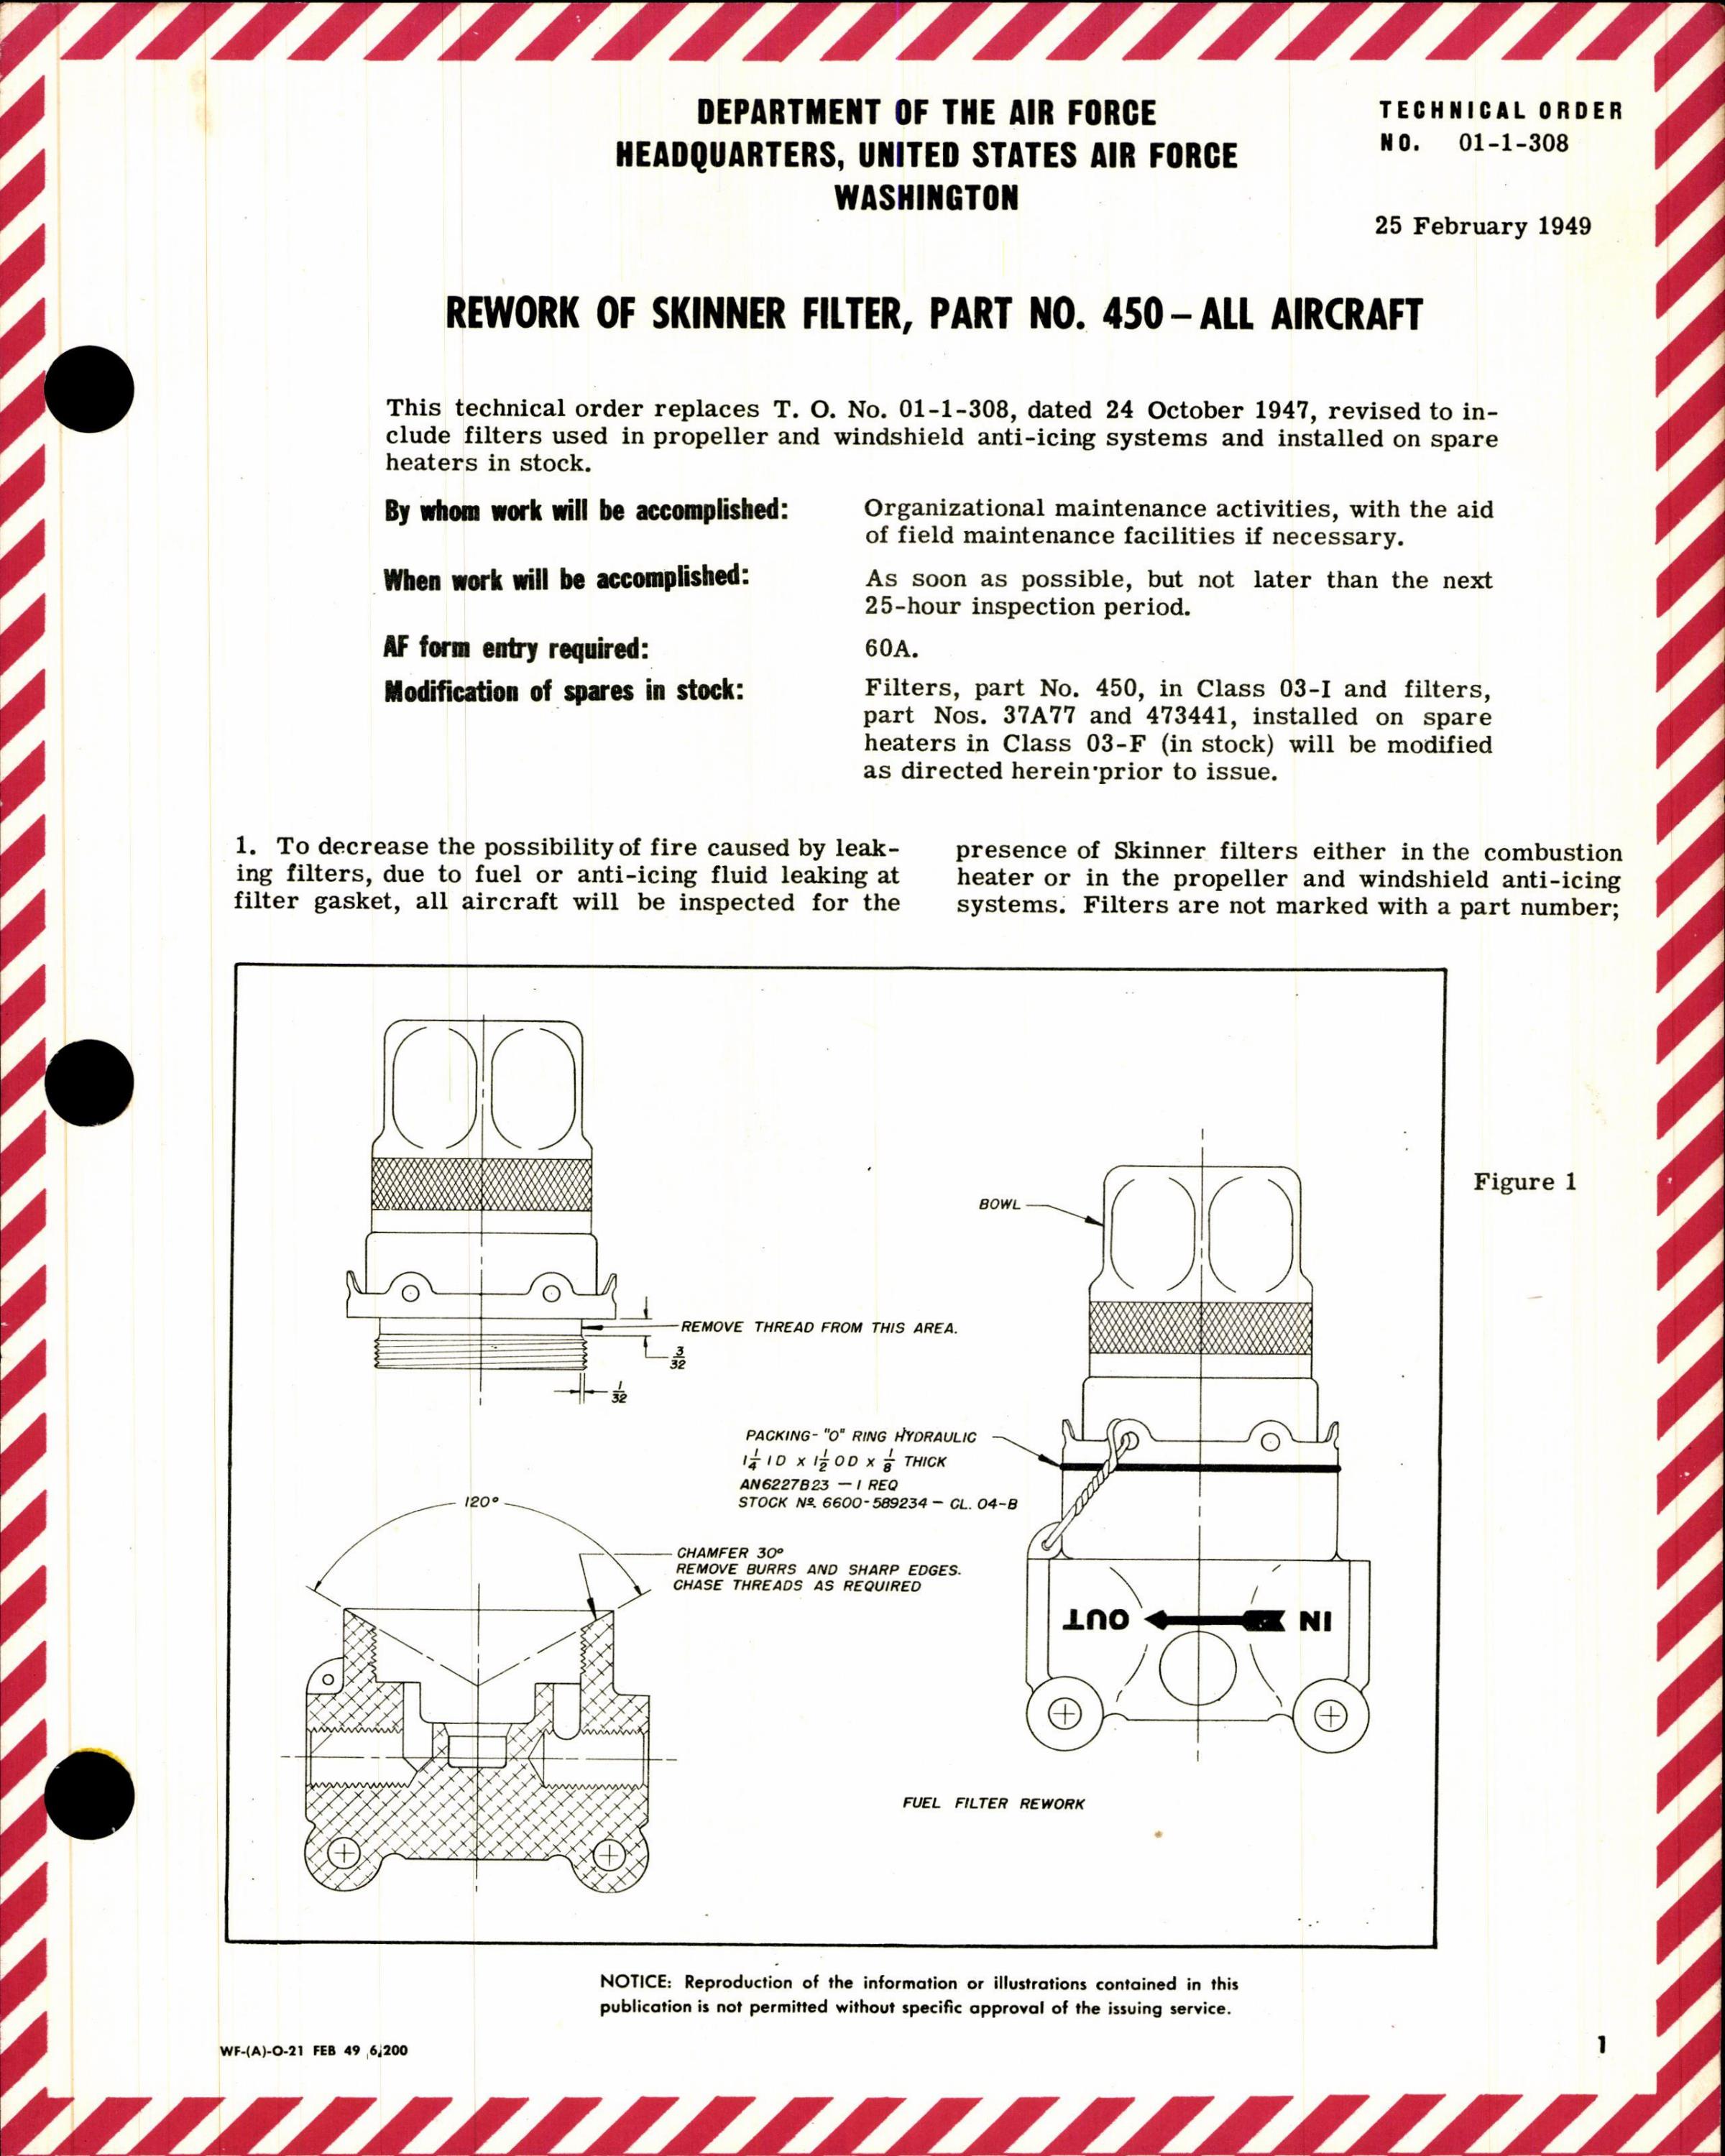 Sample page 1 from AirCorps Library document: Rework of Skinner Filter, Part No. 450